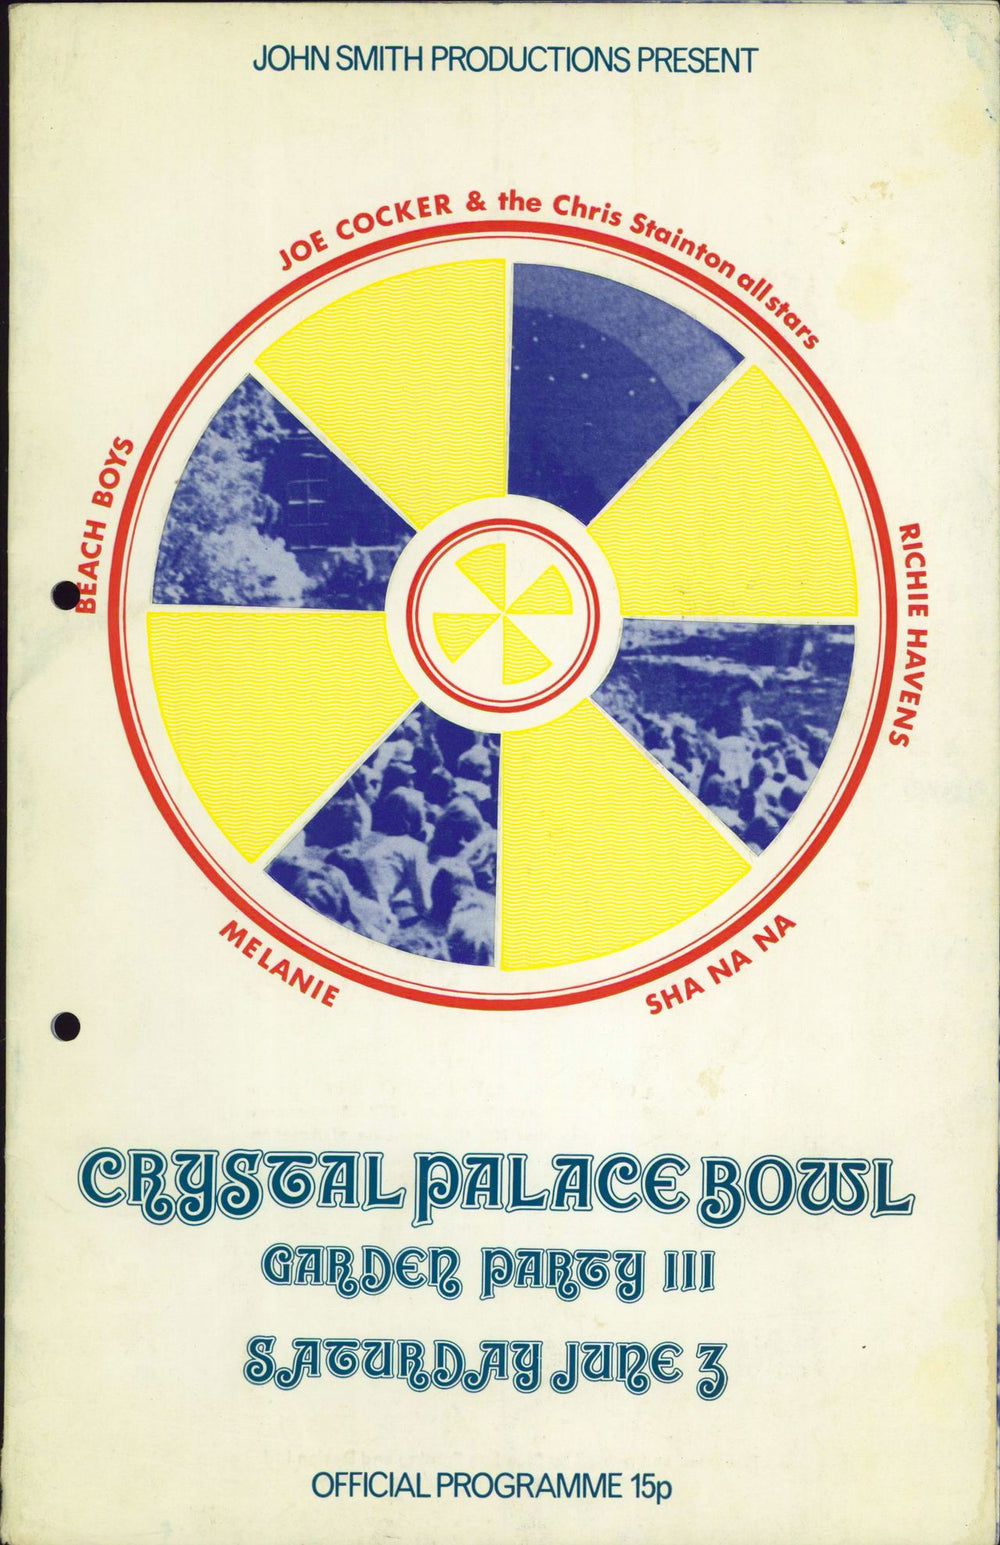 The Beach Boys Crystal Palace Bowl Garden Party III + Ticket Stub - Hole Punched UK tour programme PROGRAMME